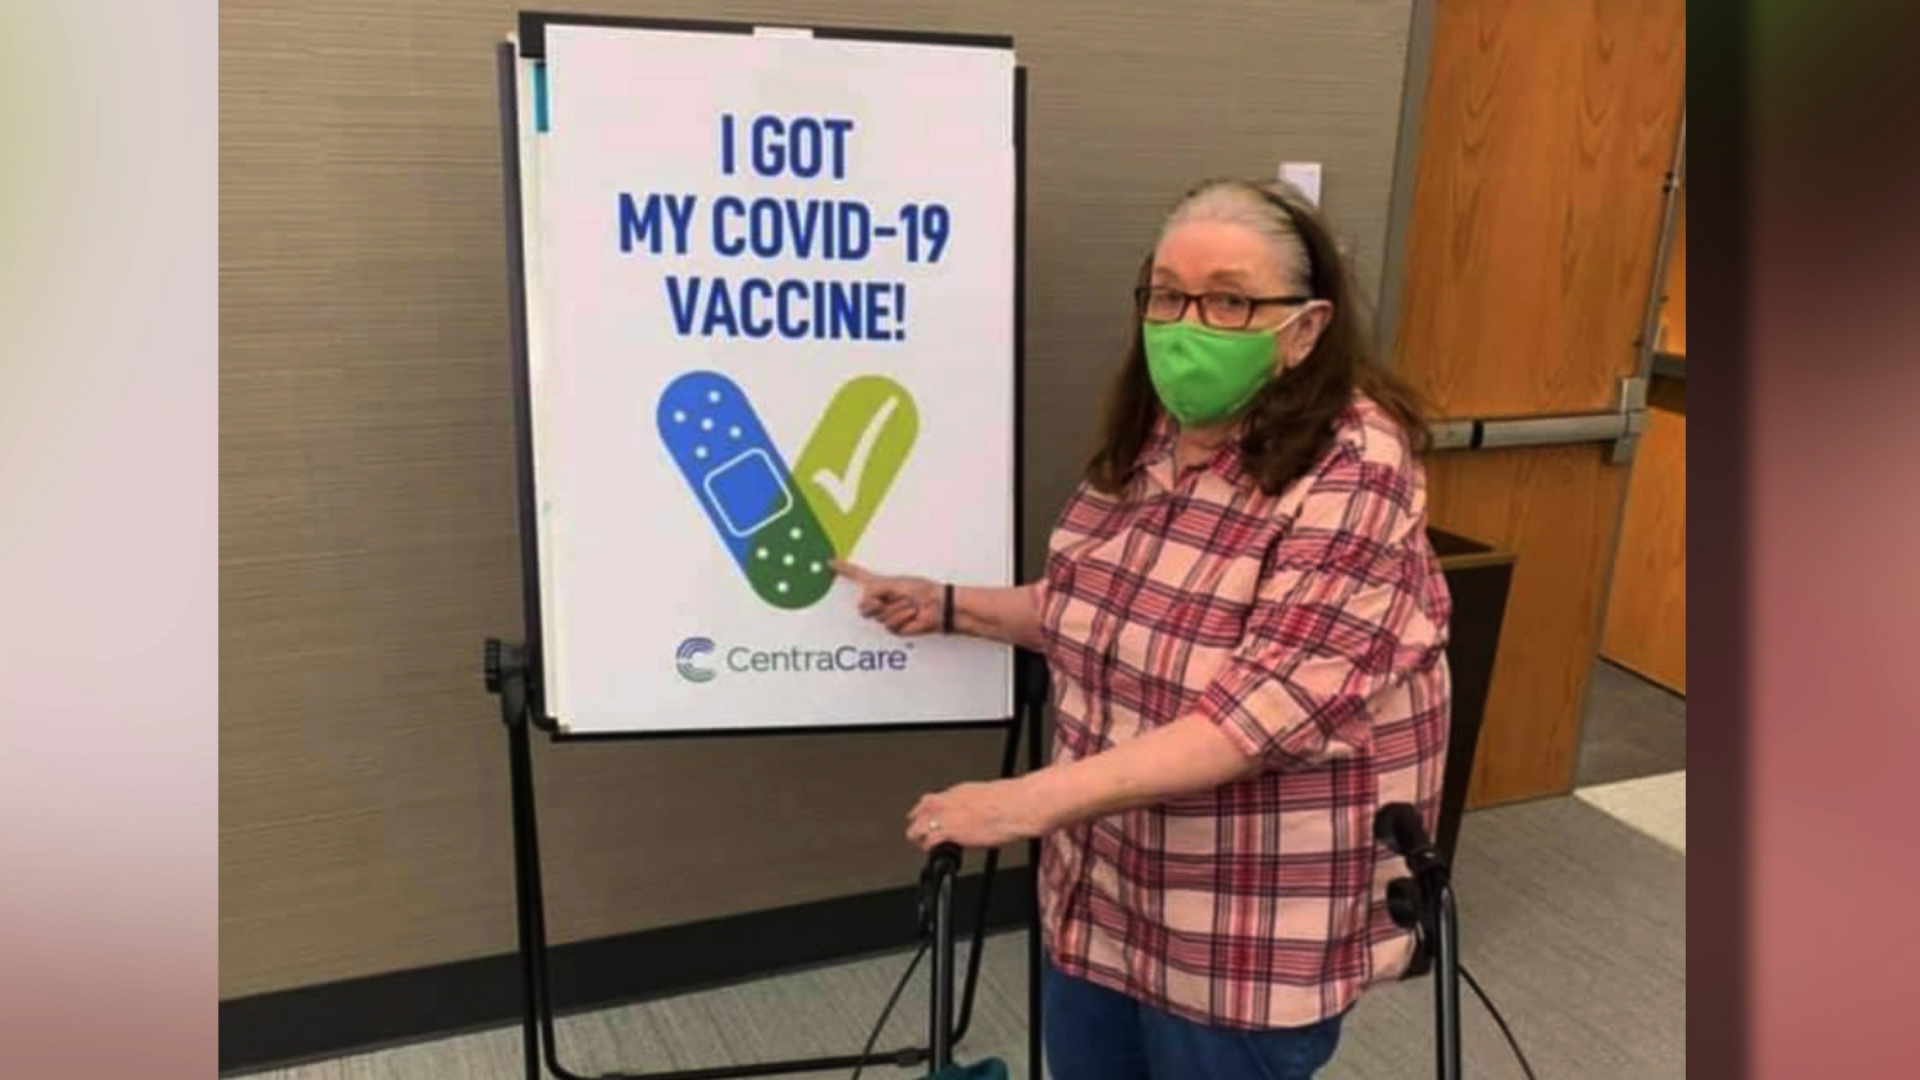 COVID in Minnesota: MDH says state has seen 14 ‘vaccination cases’ – WCCO